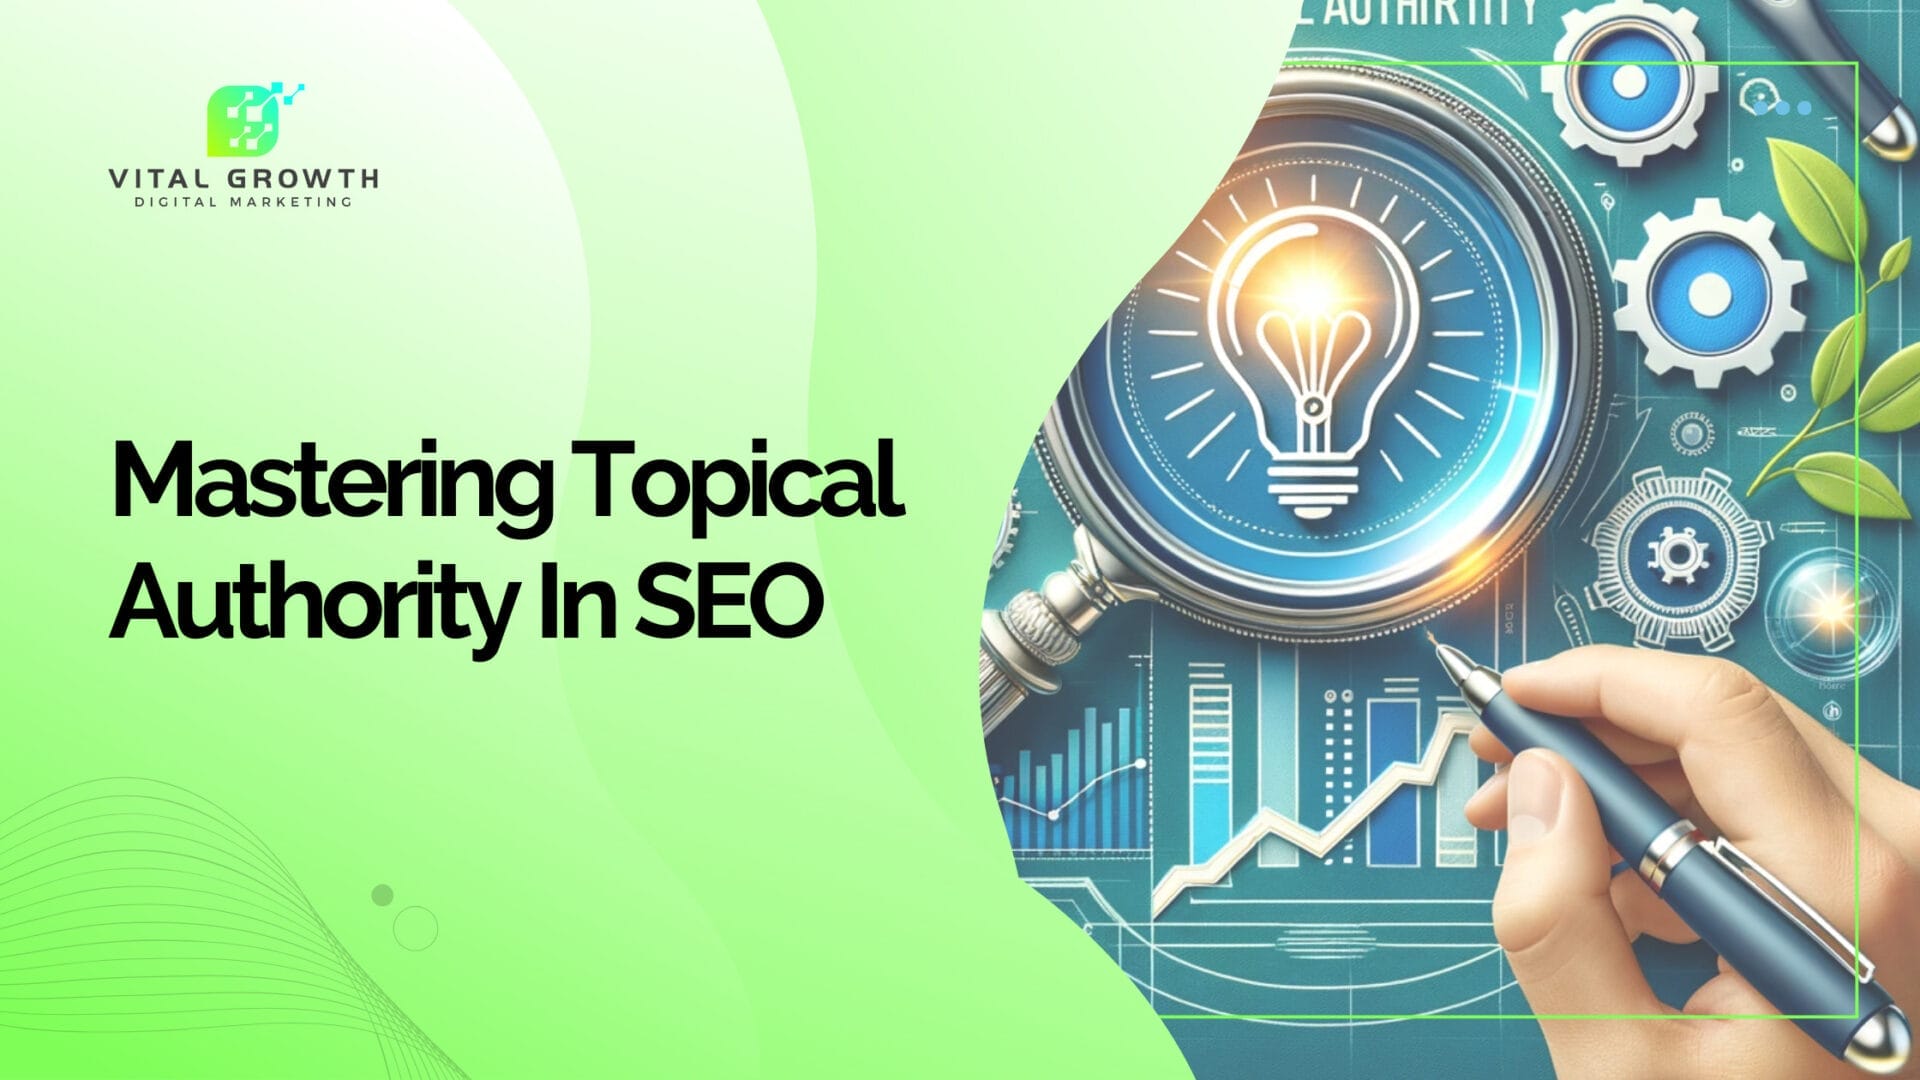 Sophisticated and modern image for 'Topical Authority SEO' blog post, featuring Vital Growth Digital Marketing's primary colors of blue and green. The design includes a stylized magnifying glass, an innovative lightbulb, intricate gears symbolizing technical SEO, and a dynamic growth graph, all set in a clear, bright composition with minimalist icons, embodying the brand's commitment to innovation, efficiency, and growth in digital marketing